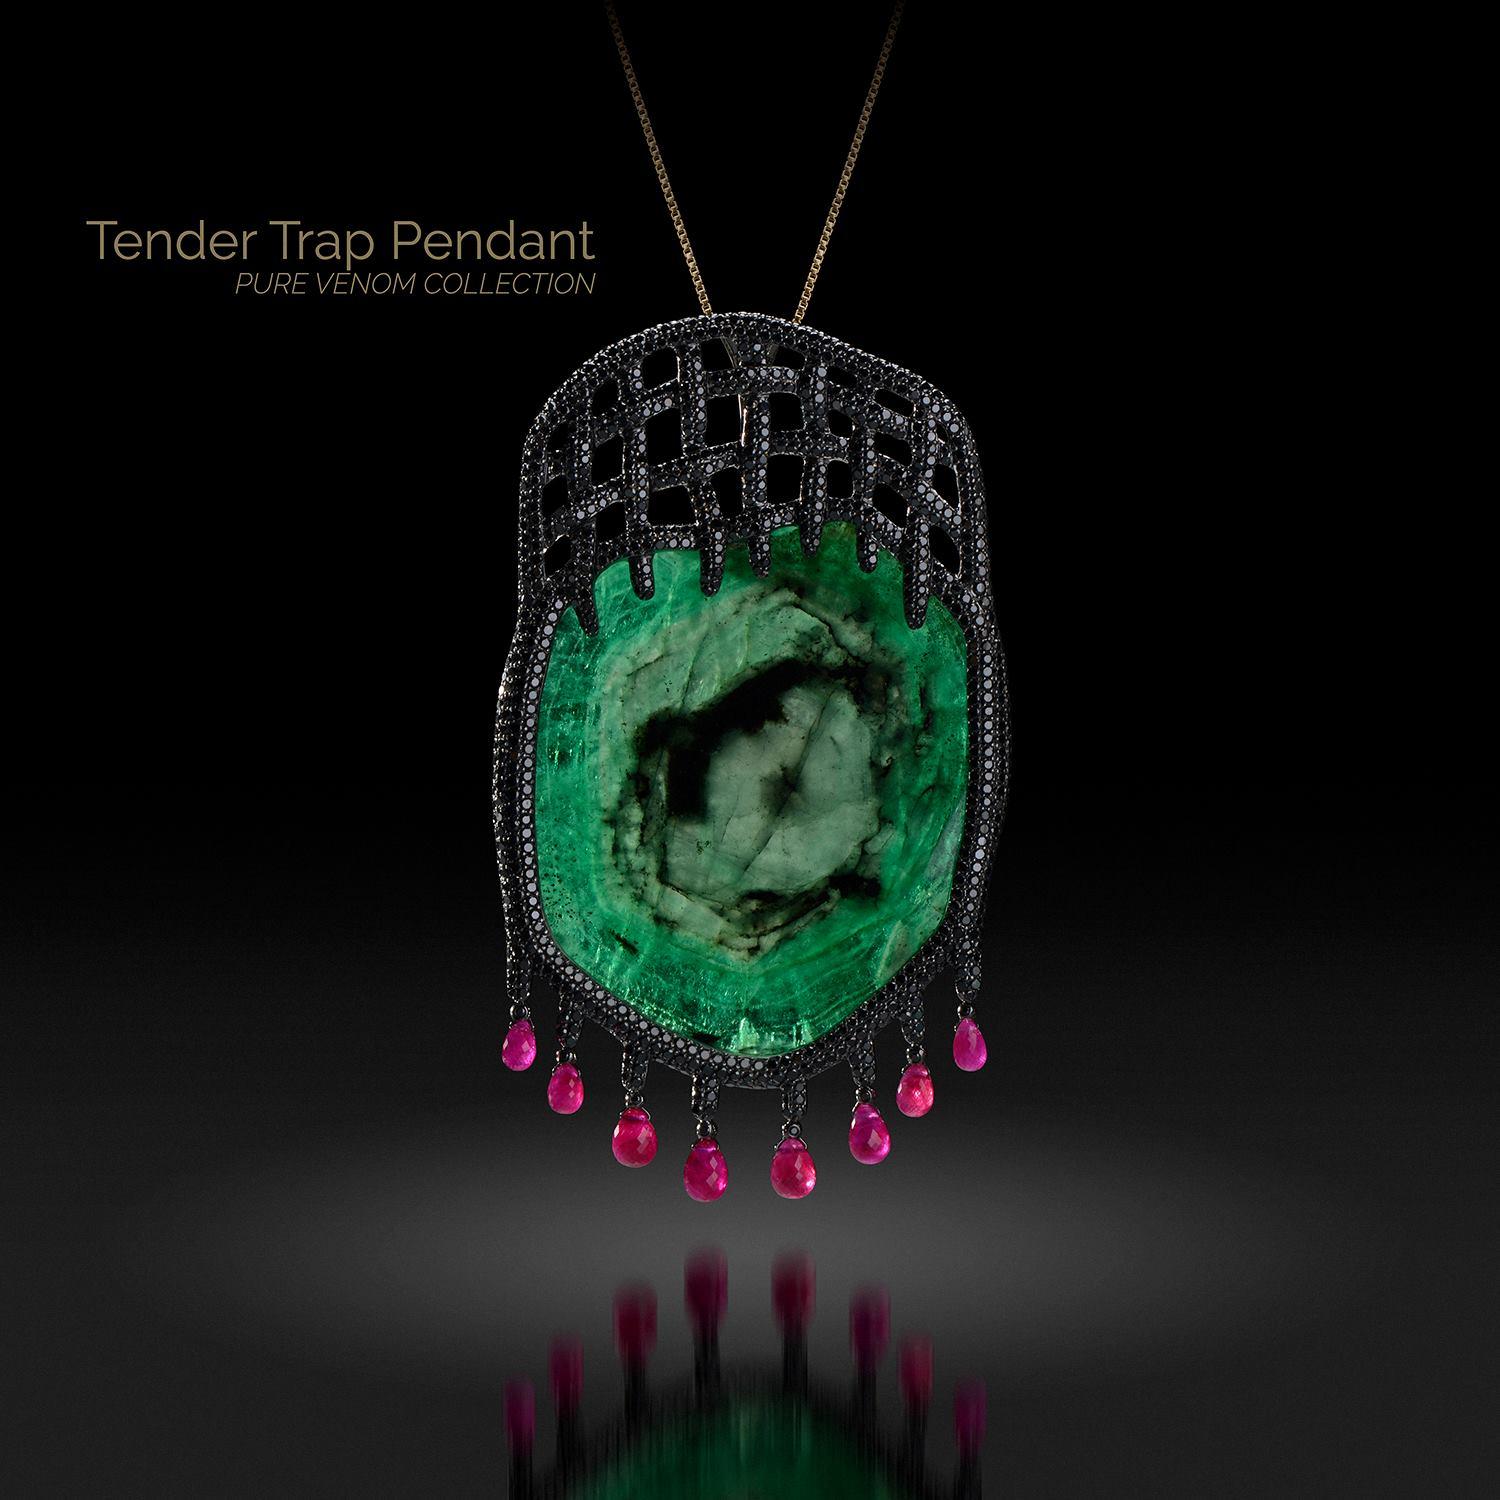 14K Yellow Gold Tender Trap Pendant with Emeralds, Black Diamonds and Rubies For Sale 1